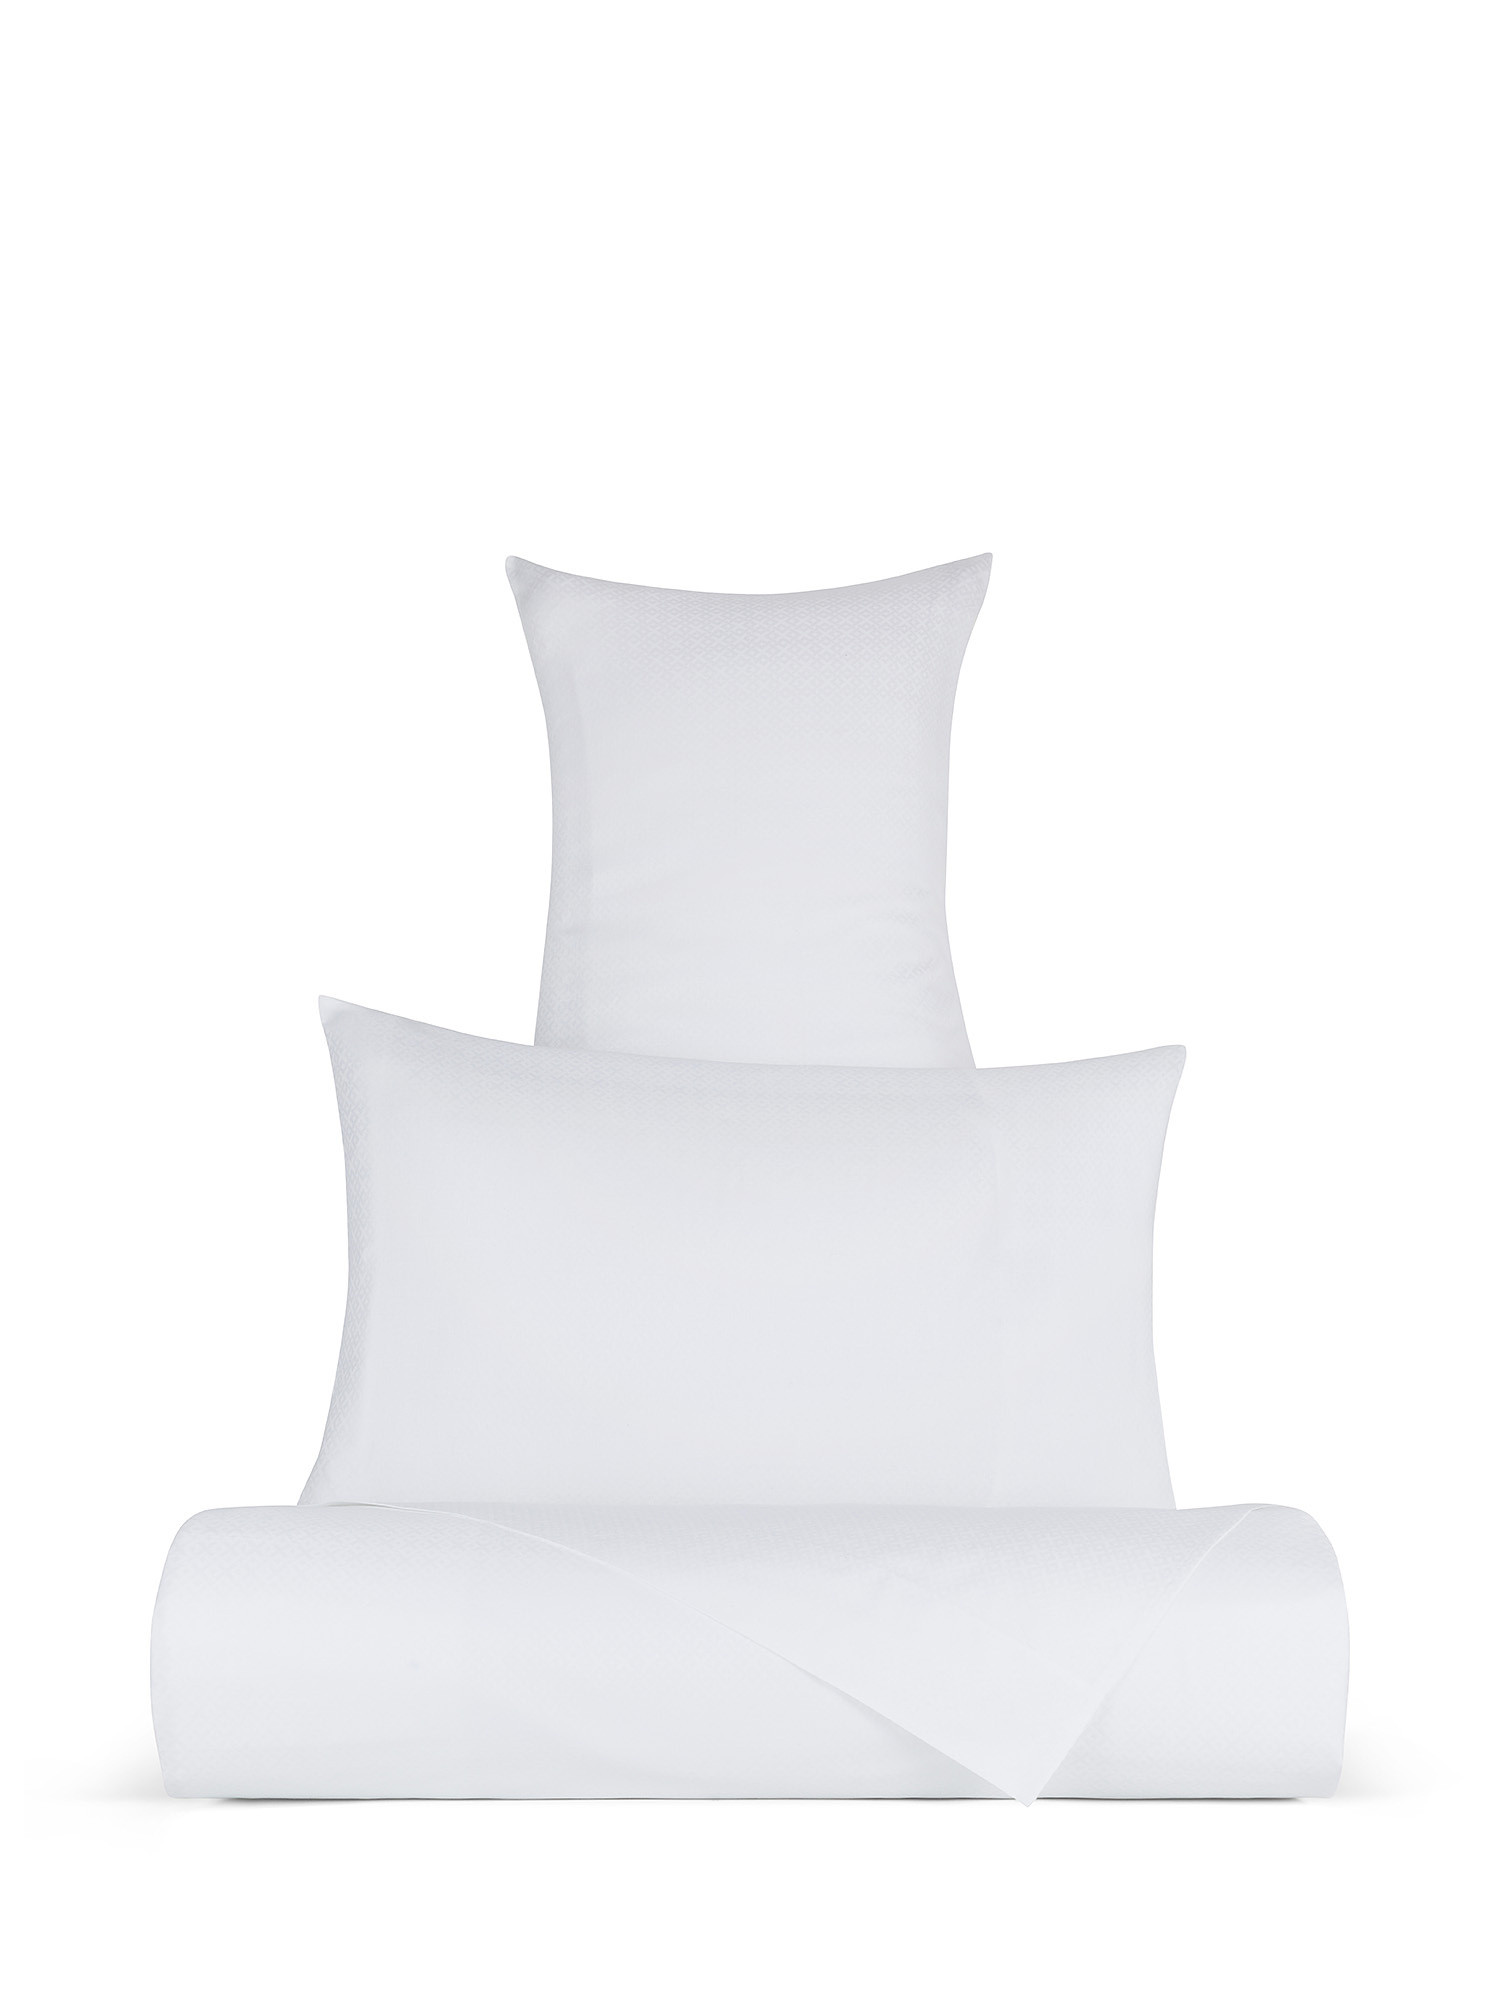 Flat sheet in fine percale cotton Portofino, White, large image number 0